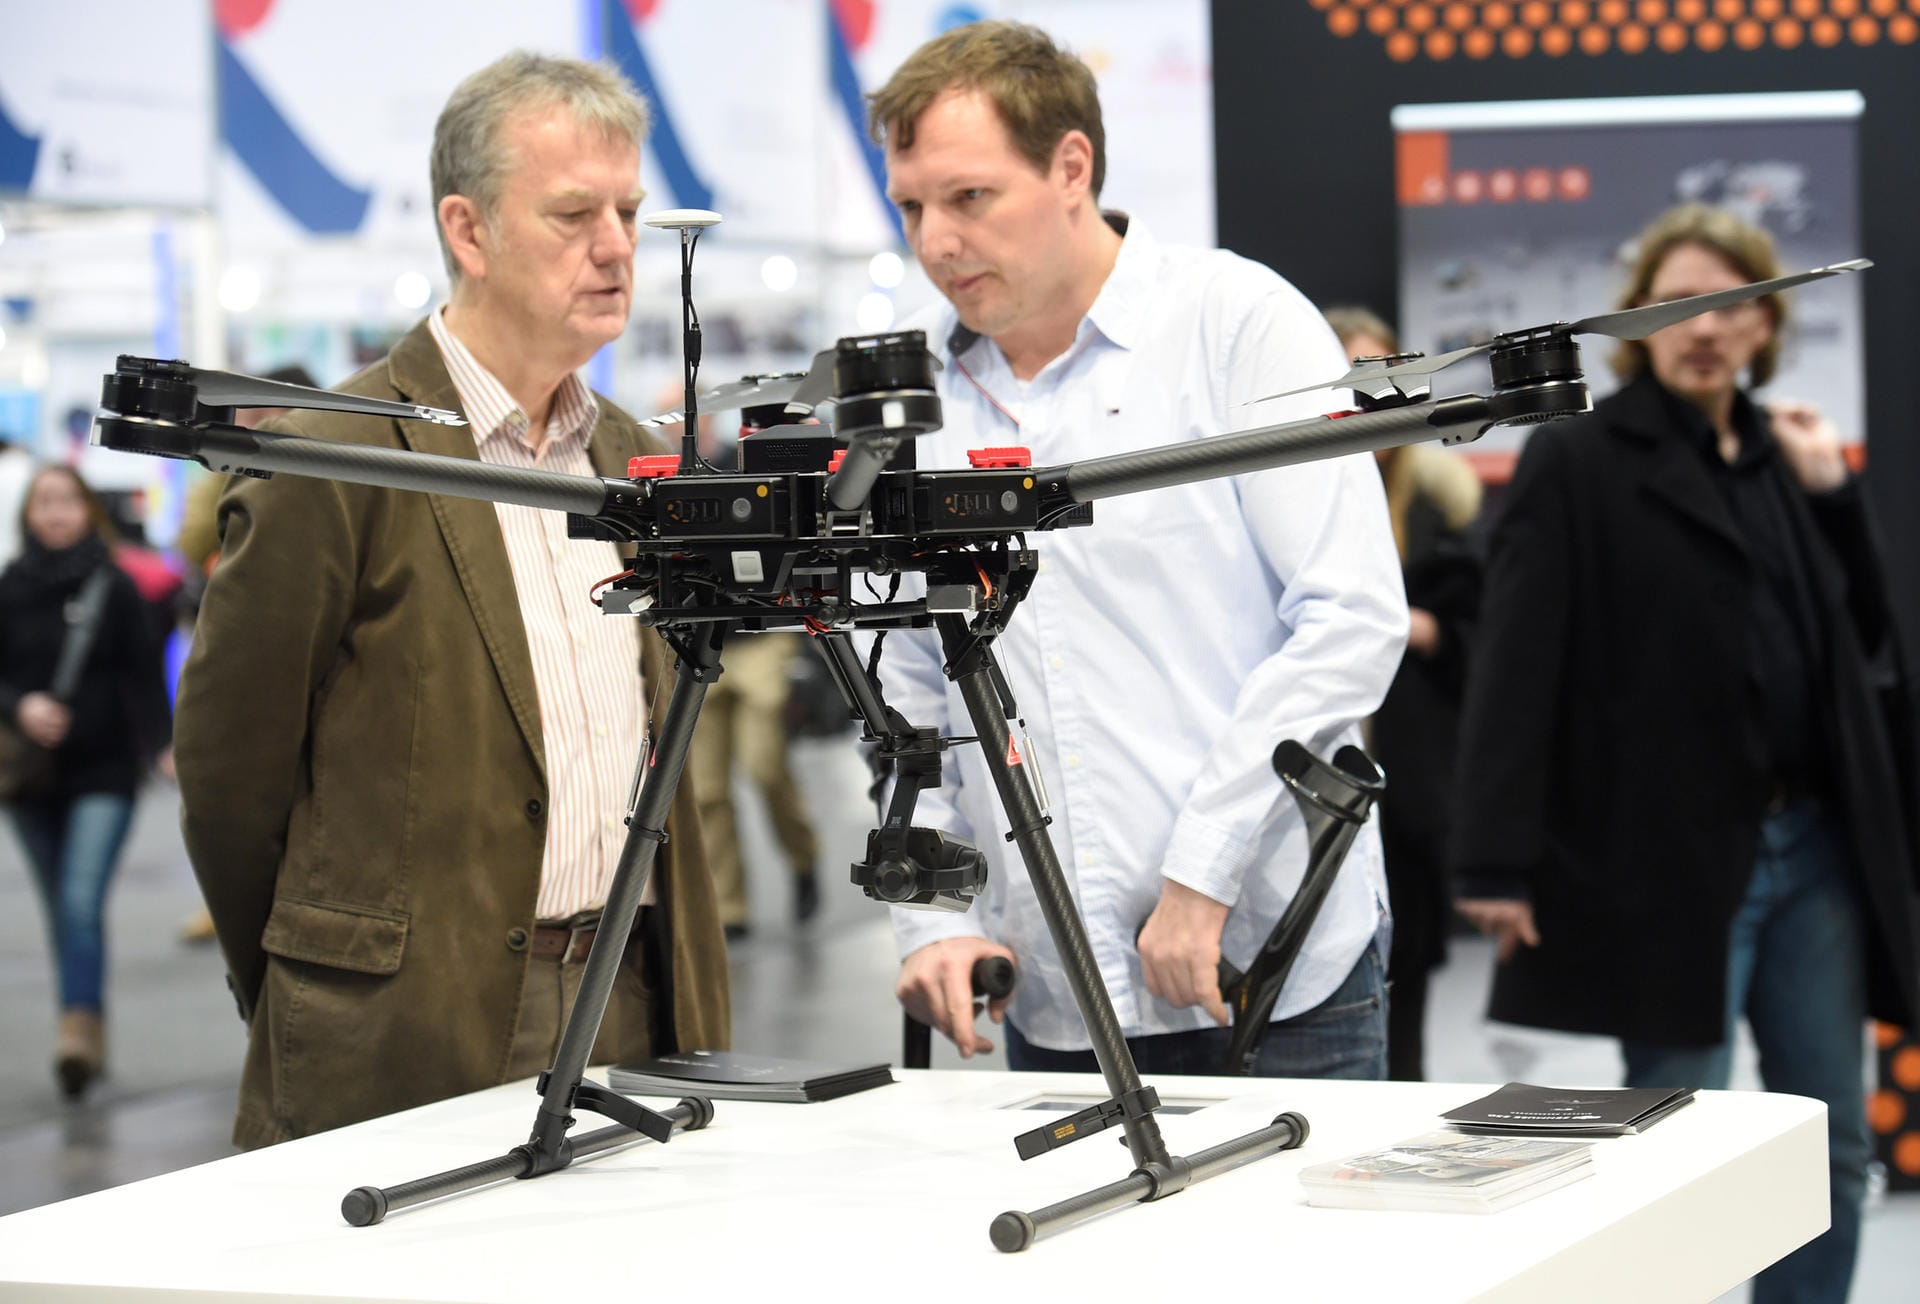 Visitors look at the drone Matrice 600 PRO at the booth of Chinese company DJI at the world's biggest computer and software fair, CeBit, in Hanover